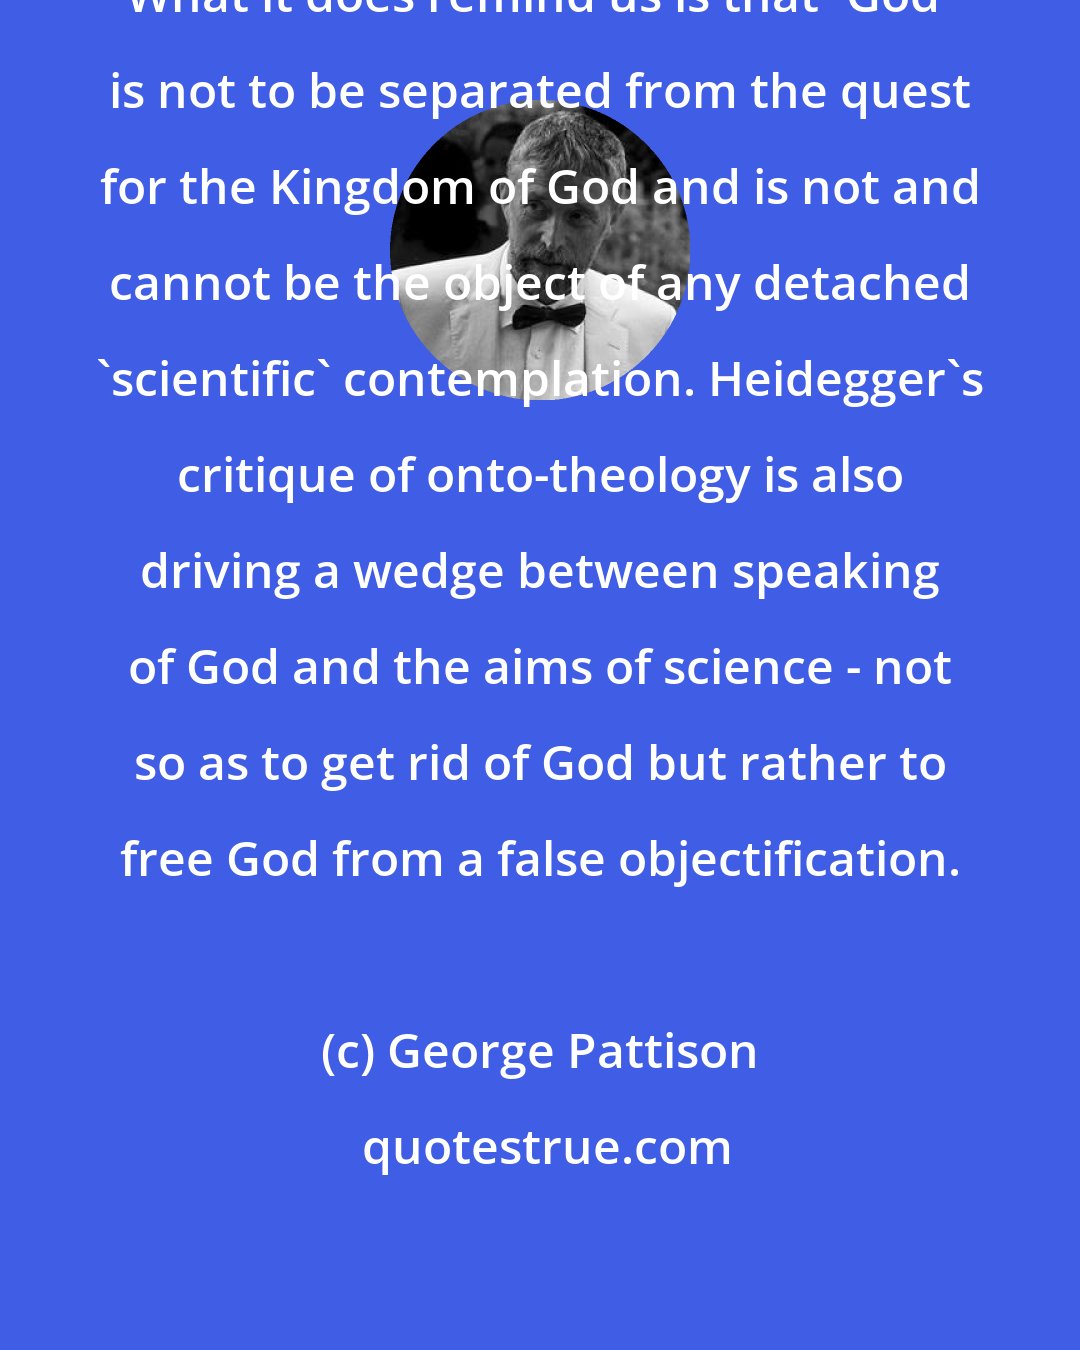 George Pattison: What it does remind us is that 'God' is not to be separated from the quest for the Kingdom of God and is not and cannot be the object of any detached 'scientific' contemplation. Heidegger's critique of onto-theology is also driving a wedge between speaking of God and the aims of science - not so as to get rid of God but rather to free God from a false objectification.